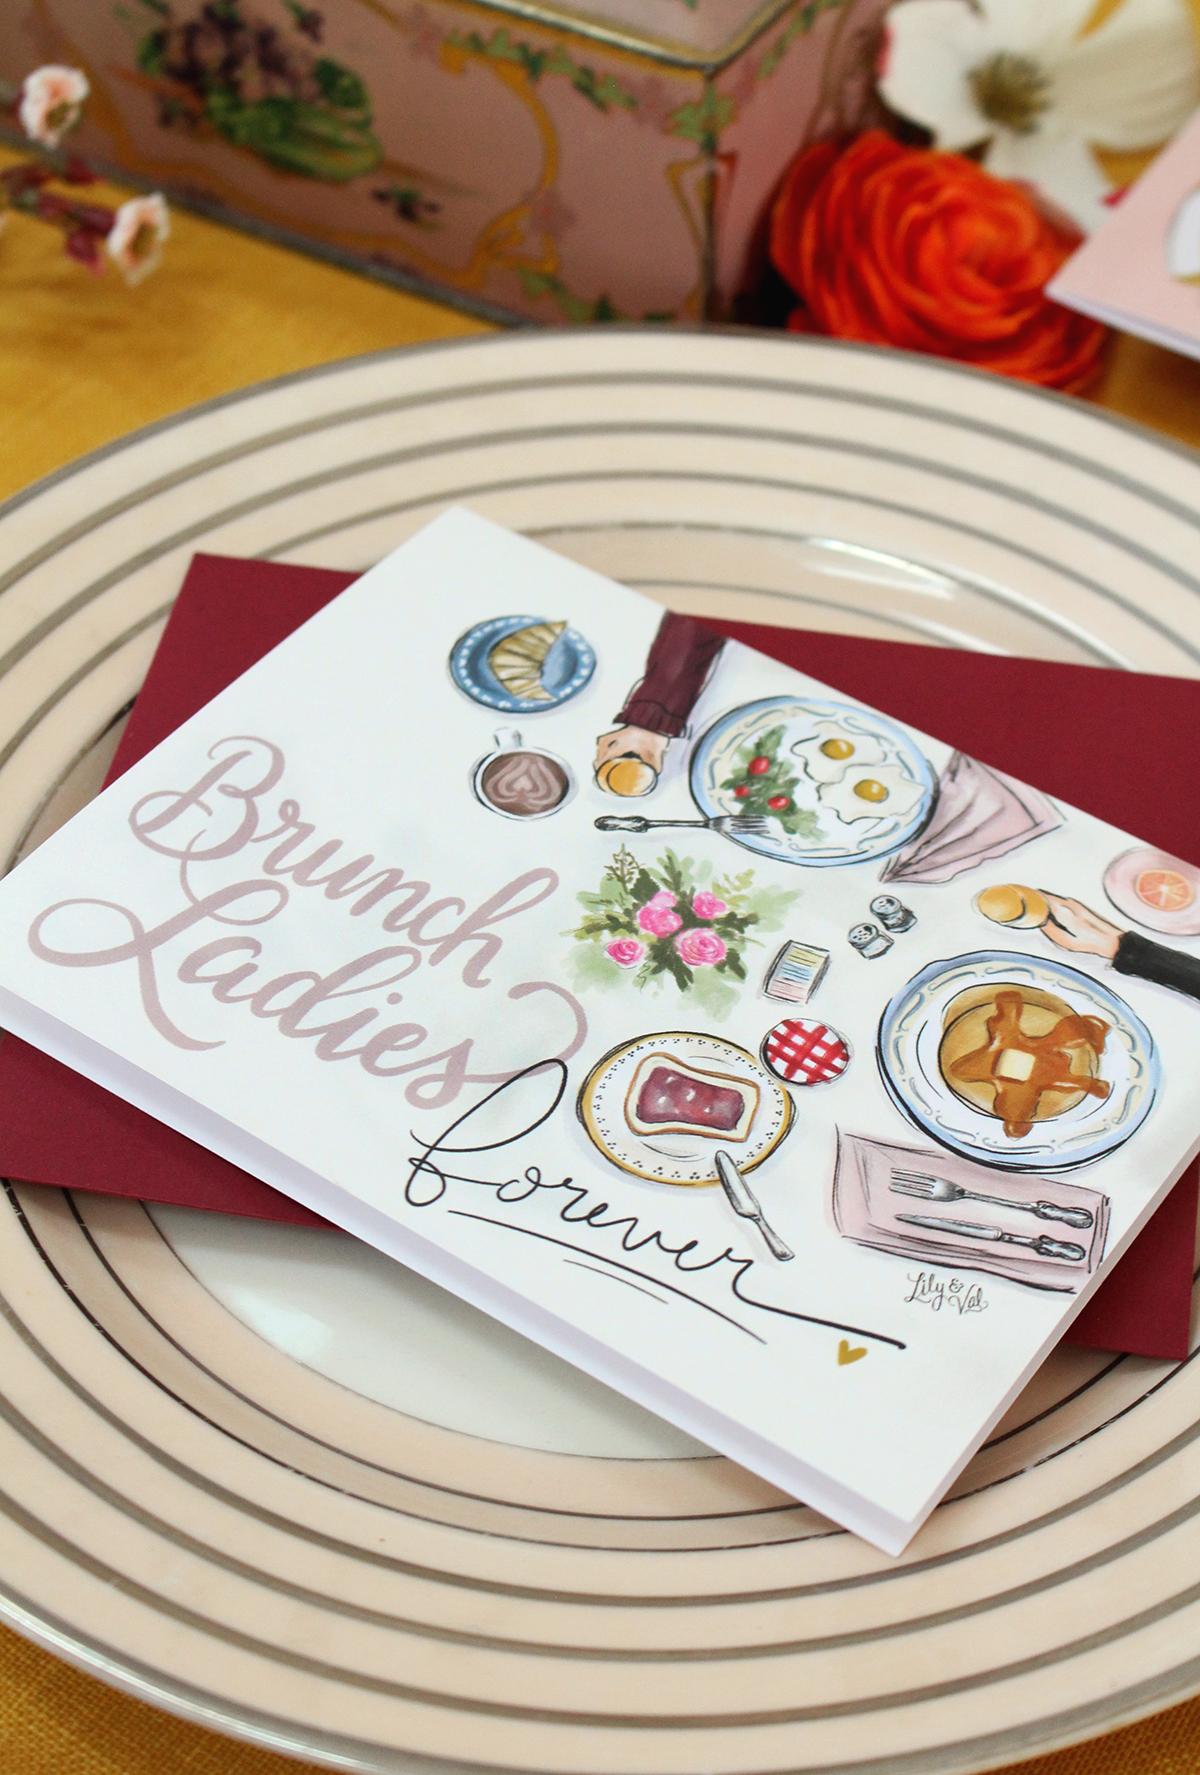 Brunch Ladies Forever! Galentine card for your best gal pals